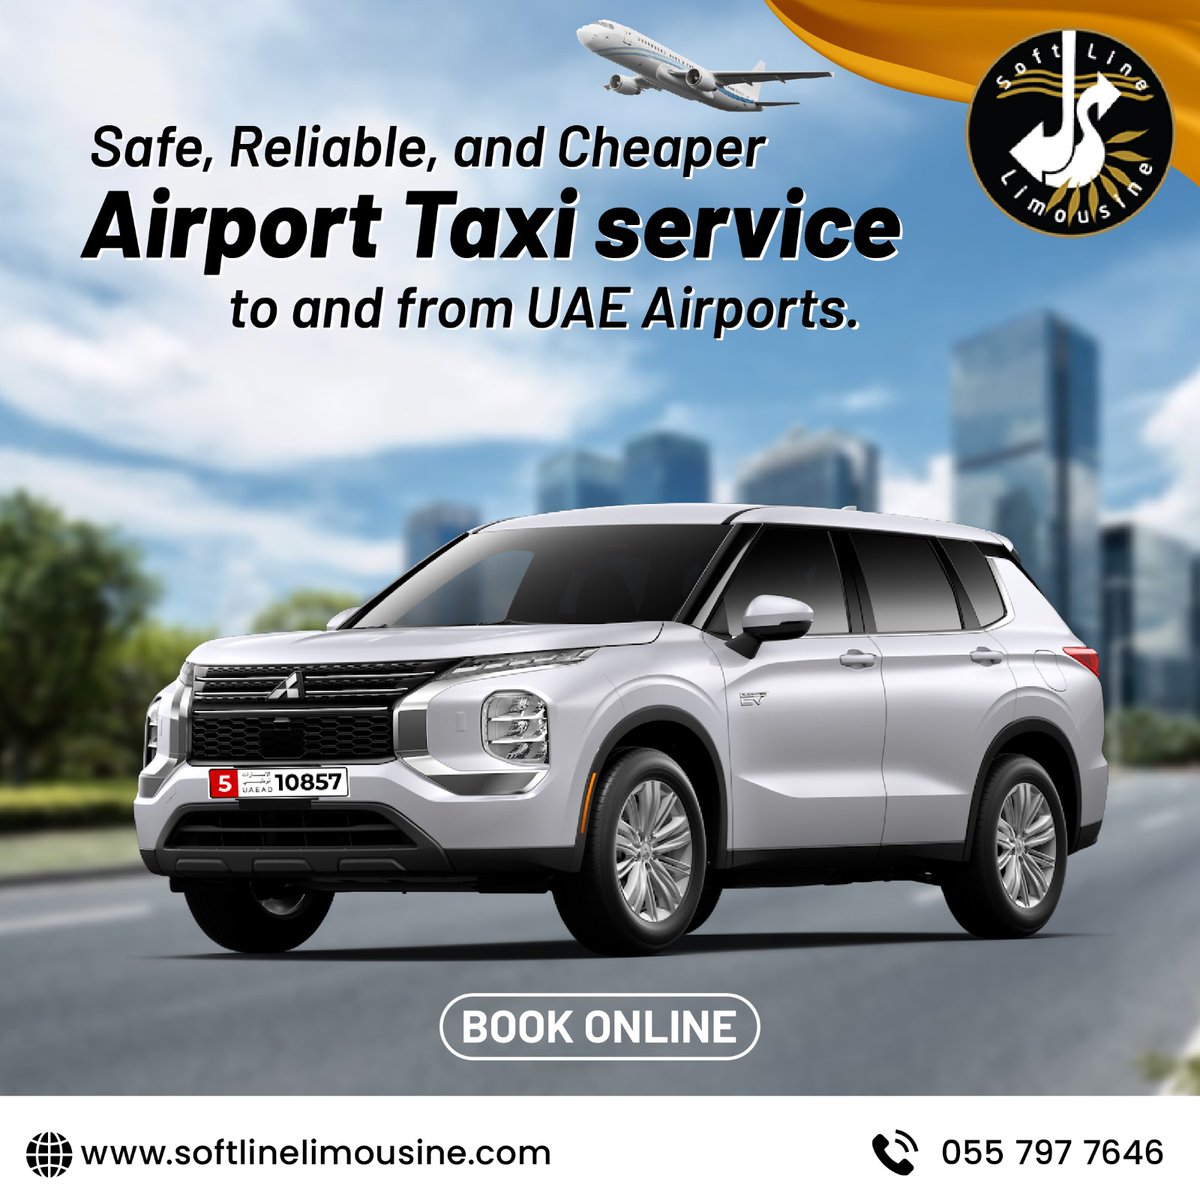 Safe, Reliable, and Cheaper Airport Taxi Service to and from UAE Airports.
Book Online

Call us🤙: +971 050 2370637, 055 7977646 (WhatsApp) 👇👇
Book your ride now at softlinelimousine.com

#airporttaxiservice #dubaiairport #abudhabiairport #airporttransfers #nextride